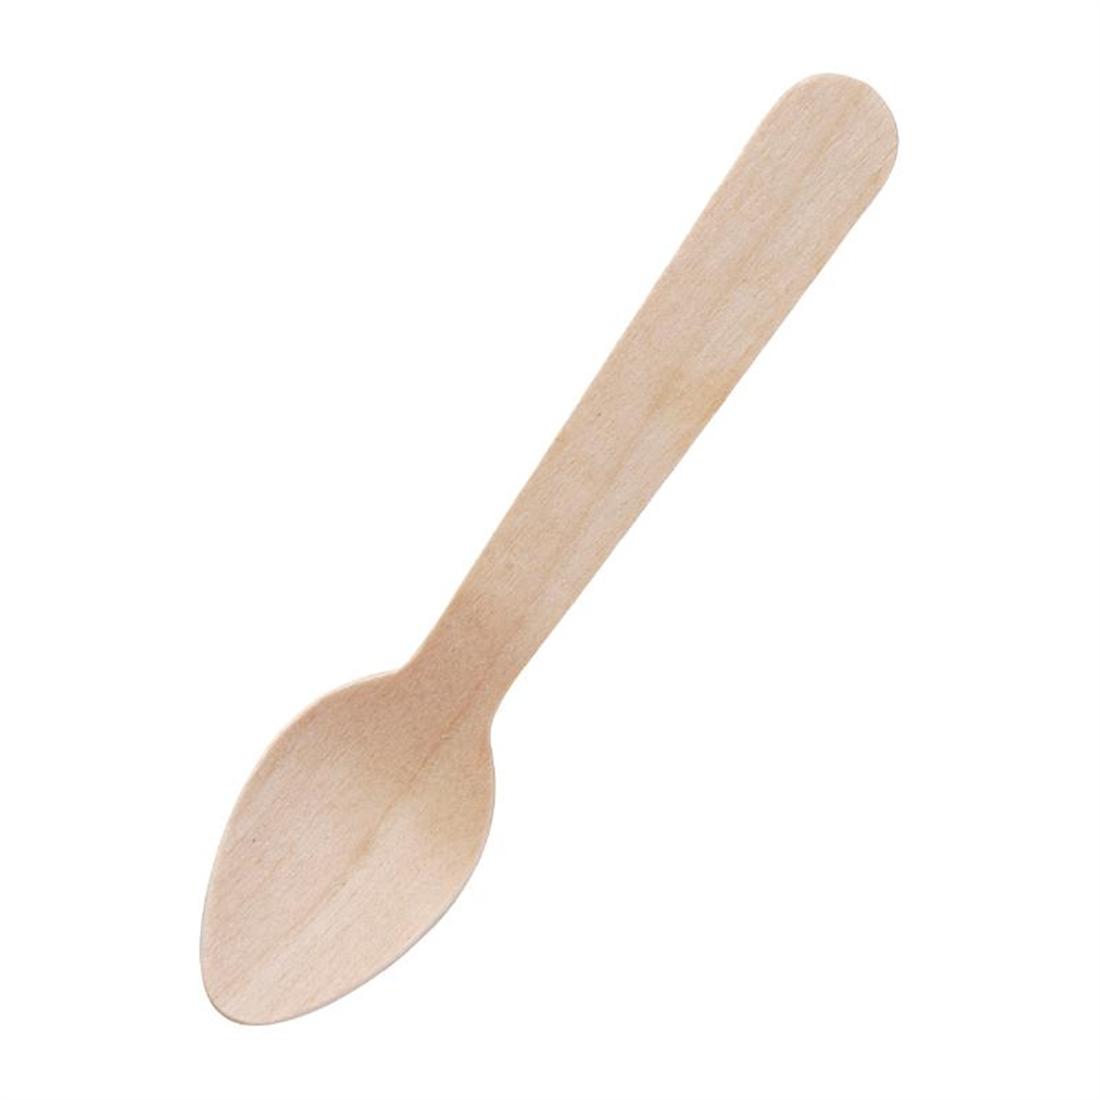 Disposable Wooden Teaspoons Compostable Recyclable - Case: 100 - CD905 - 1